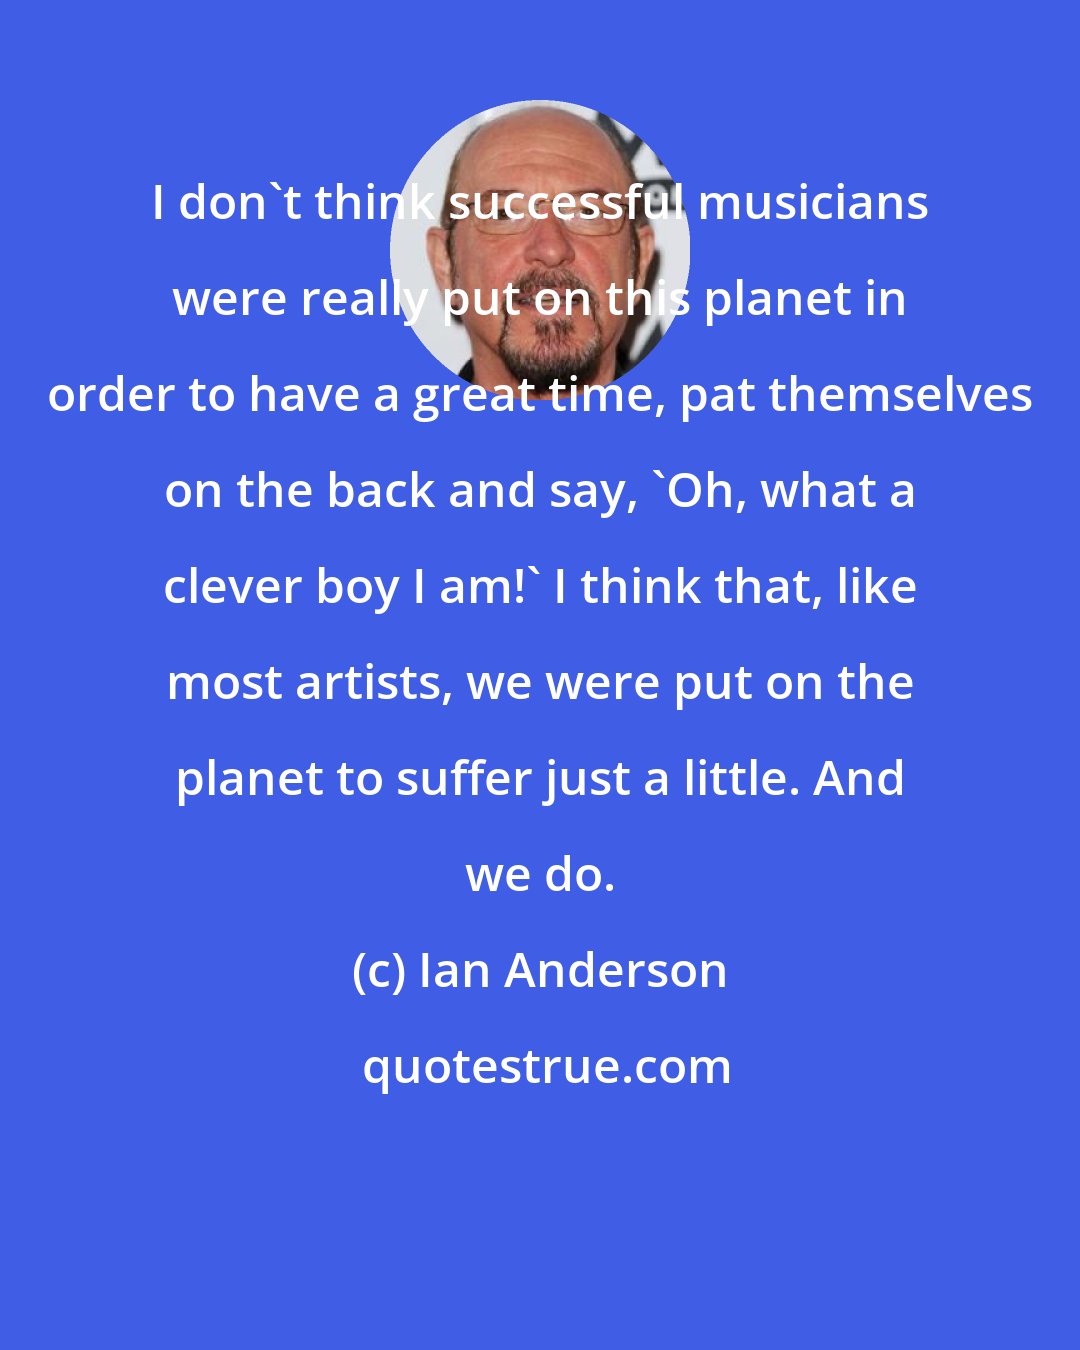 Ian Anderson: I don't think successful musicians were really put on this planet in order to have a great time, pat themselves on the back and say, 'Oh, what a clever boy I am!' I think that, like most artists, we were put on the planet to suffer just a little. And we do.